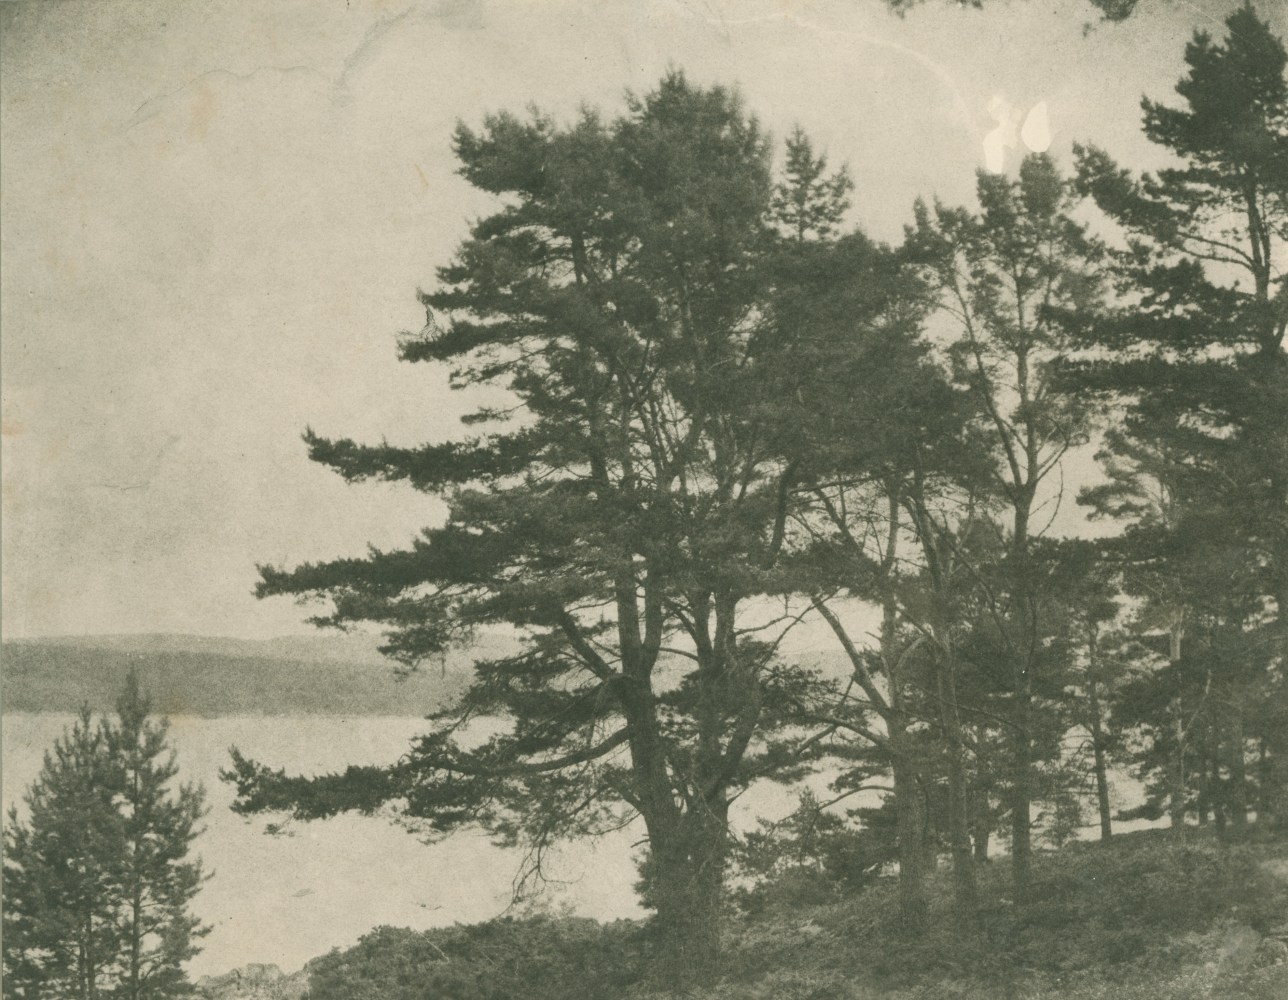 Captain Horatio Ross&amp;nbsp;(Scottish, 1801-1886)
&amp;quot;Fir trees on the banks of Dornochs Firth between Ardgay and Fearn&amp;quot;
Platinum print, printed after 1878
26.4 x 33.1 cm

&amp;nbsp;